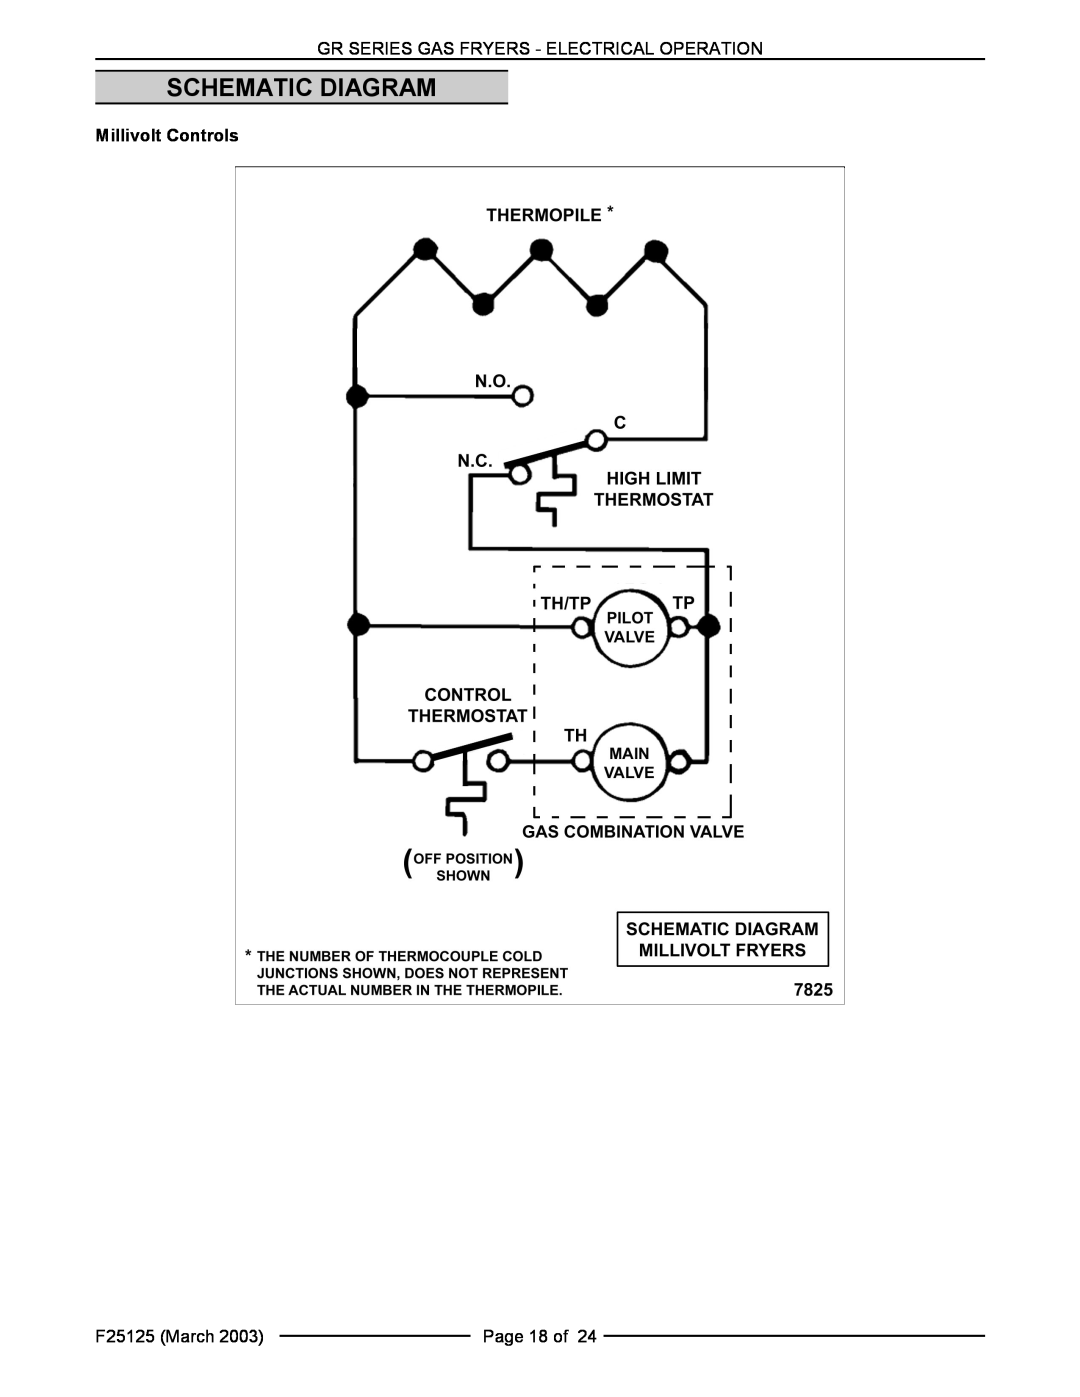 Vulcan-Hart GR45, GR65, GR85F, GR25 Schematic Diagram, Gr Series Gas Fryers - Electrical Operation, F25125 March, Page 18 of 